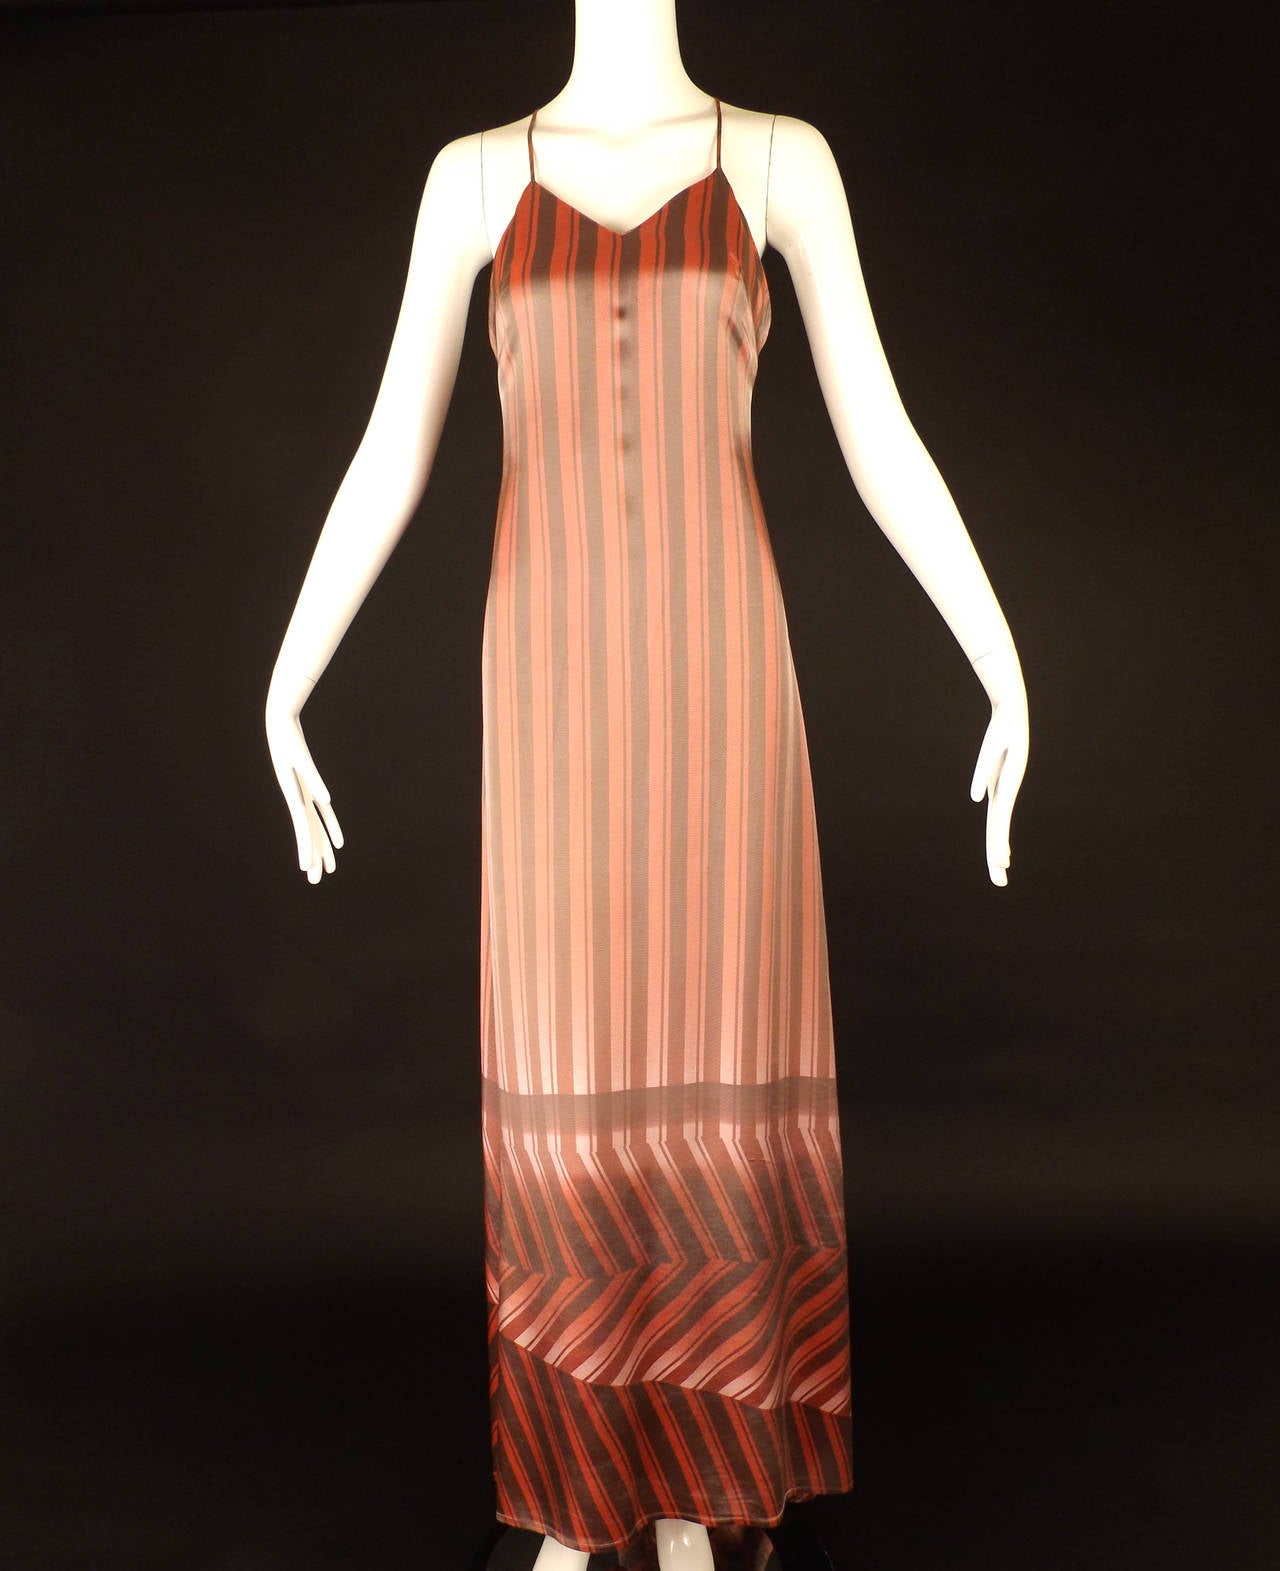 This is a late 1990s evening gown in a rayon lend satin with a pink and gray stripe pattern. The slip dress has spaghetti straps that criss cross in back. Dart fitted from the bust points to the side seams.   The dress falls slender with a sweeping